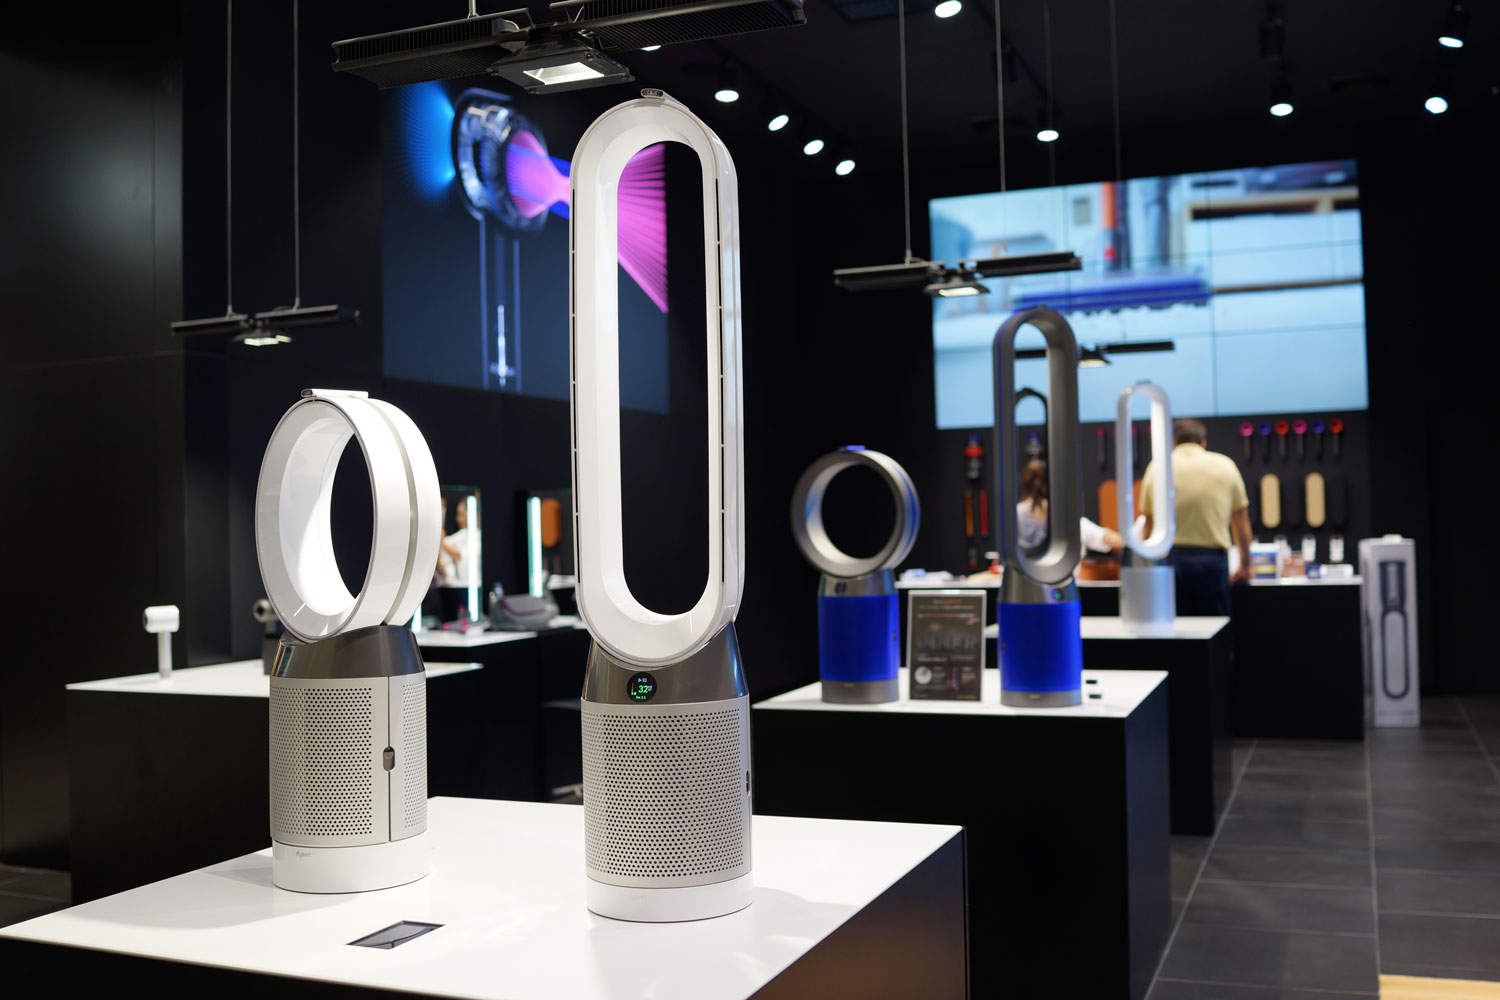 Tower fans and Air multiplier displayed at a Dyson showroom